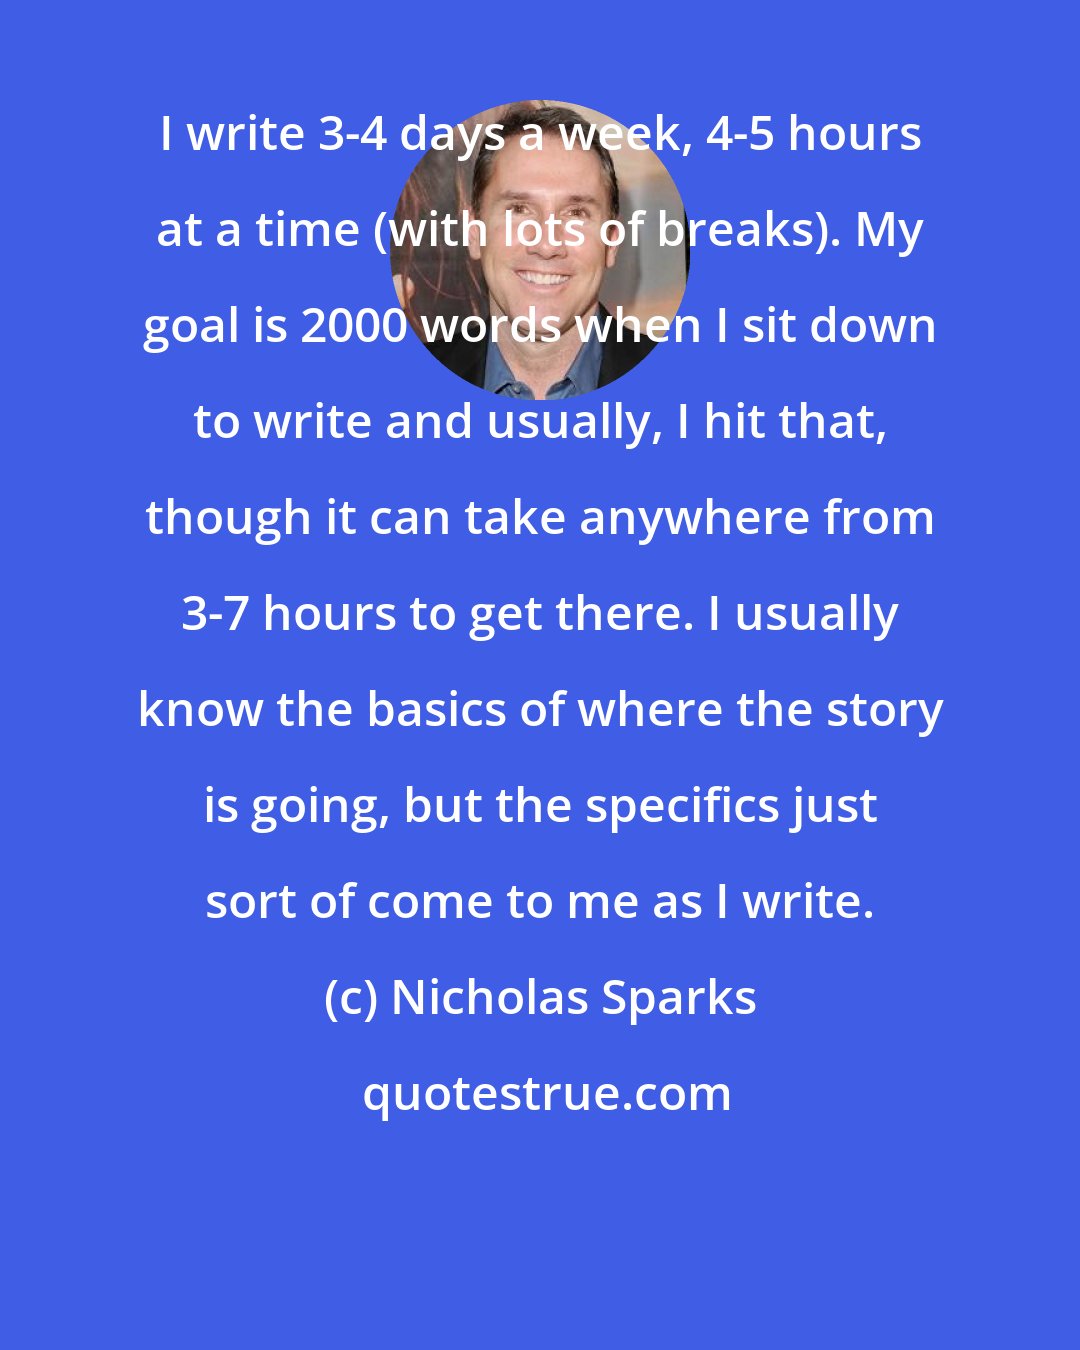 Nicholas Sparks: I write 3-4 days a week, 4-5 hours at a time (with lots of breaks). My goal is 2000 words when I sit down to write and usually, I hit that, though it can take anywhere from 3-7 hours to get there. I usually know the basics of where the story is going, but the specifics just sort of come to me as I write.